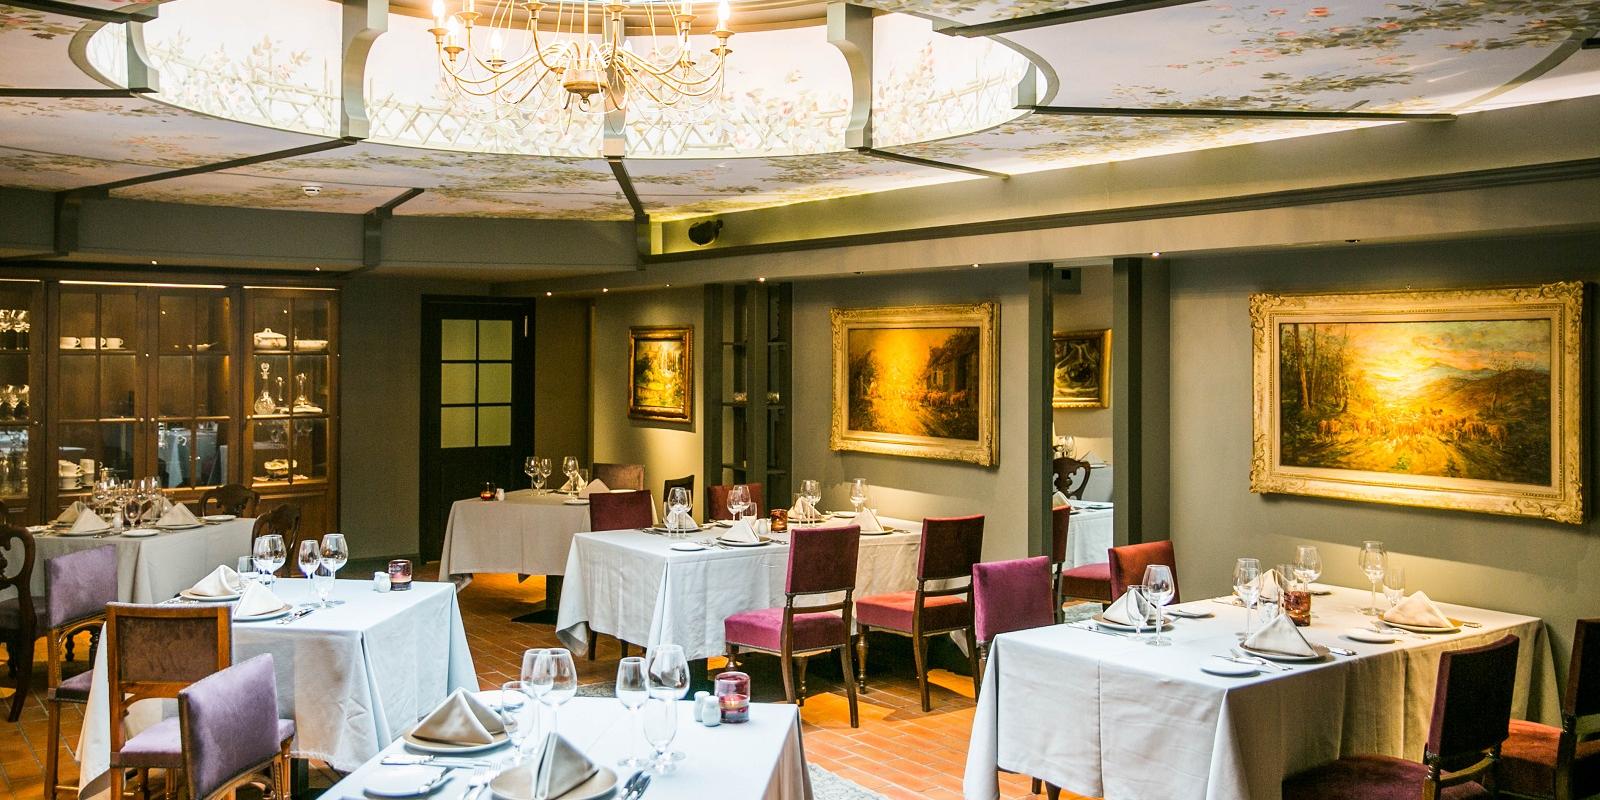 Restaurant Antonius wins the heart of its visitors from the very first moment. It has a ceiling with rose motifs, a glass atrium casting evening light